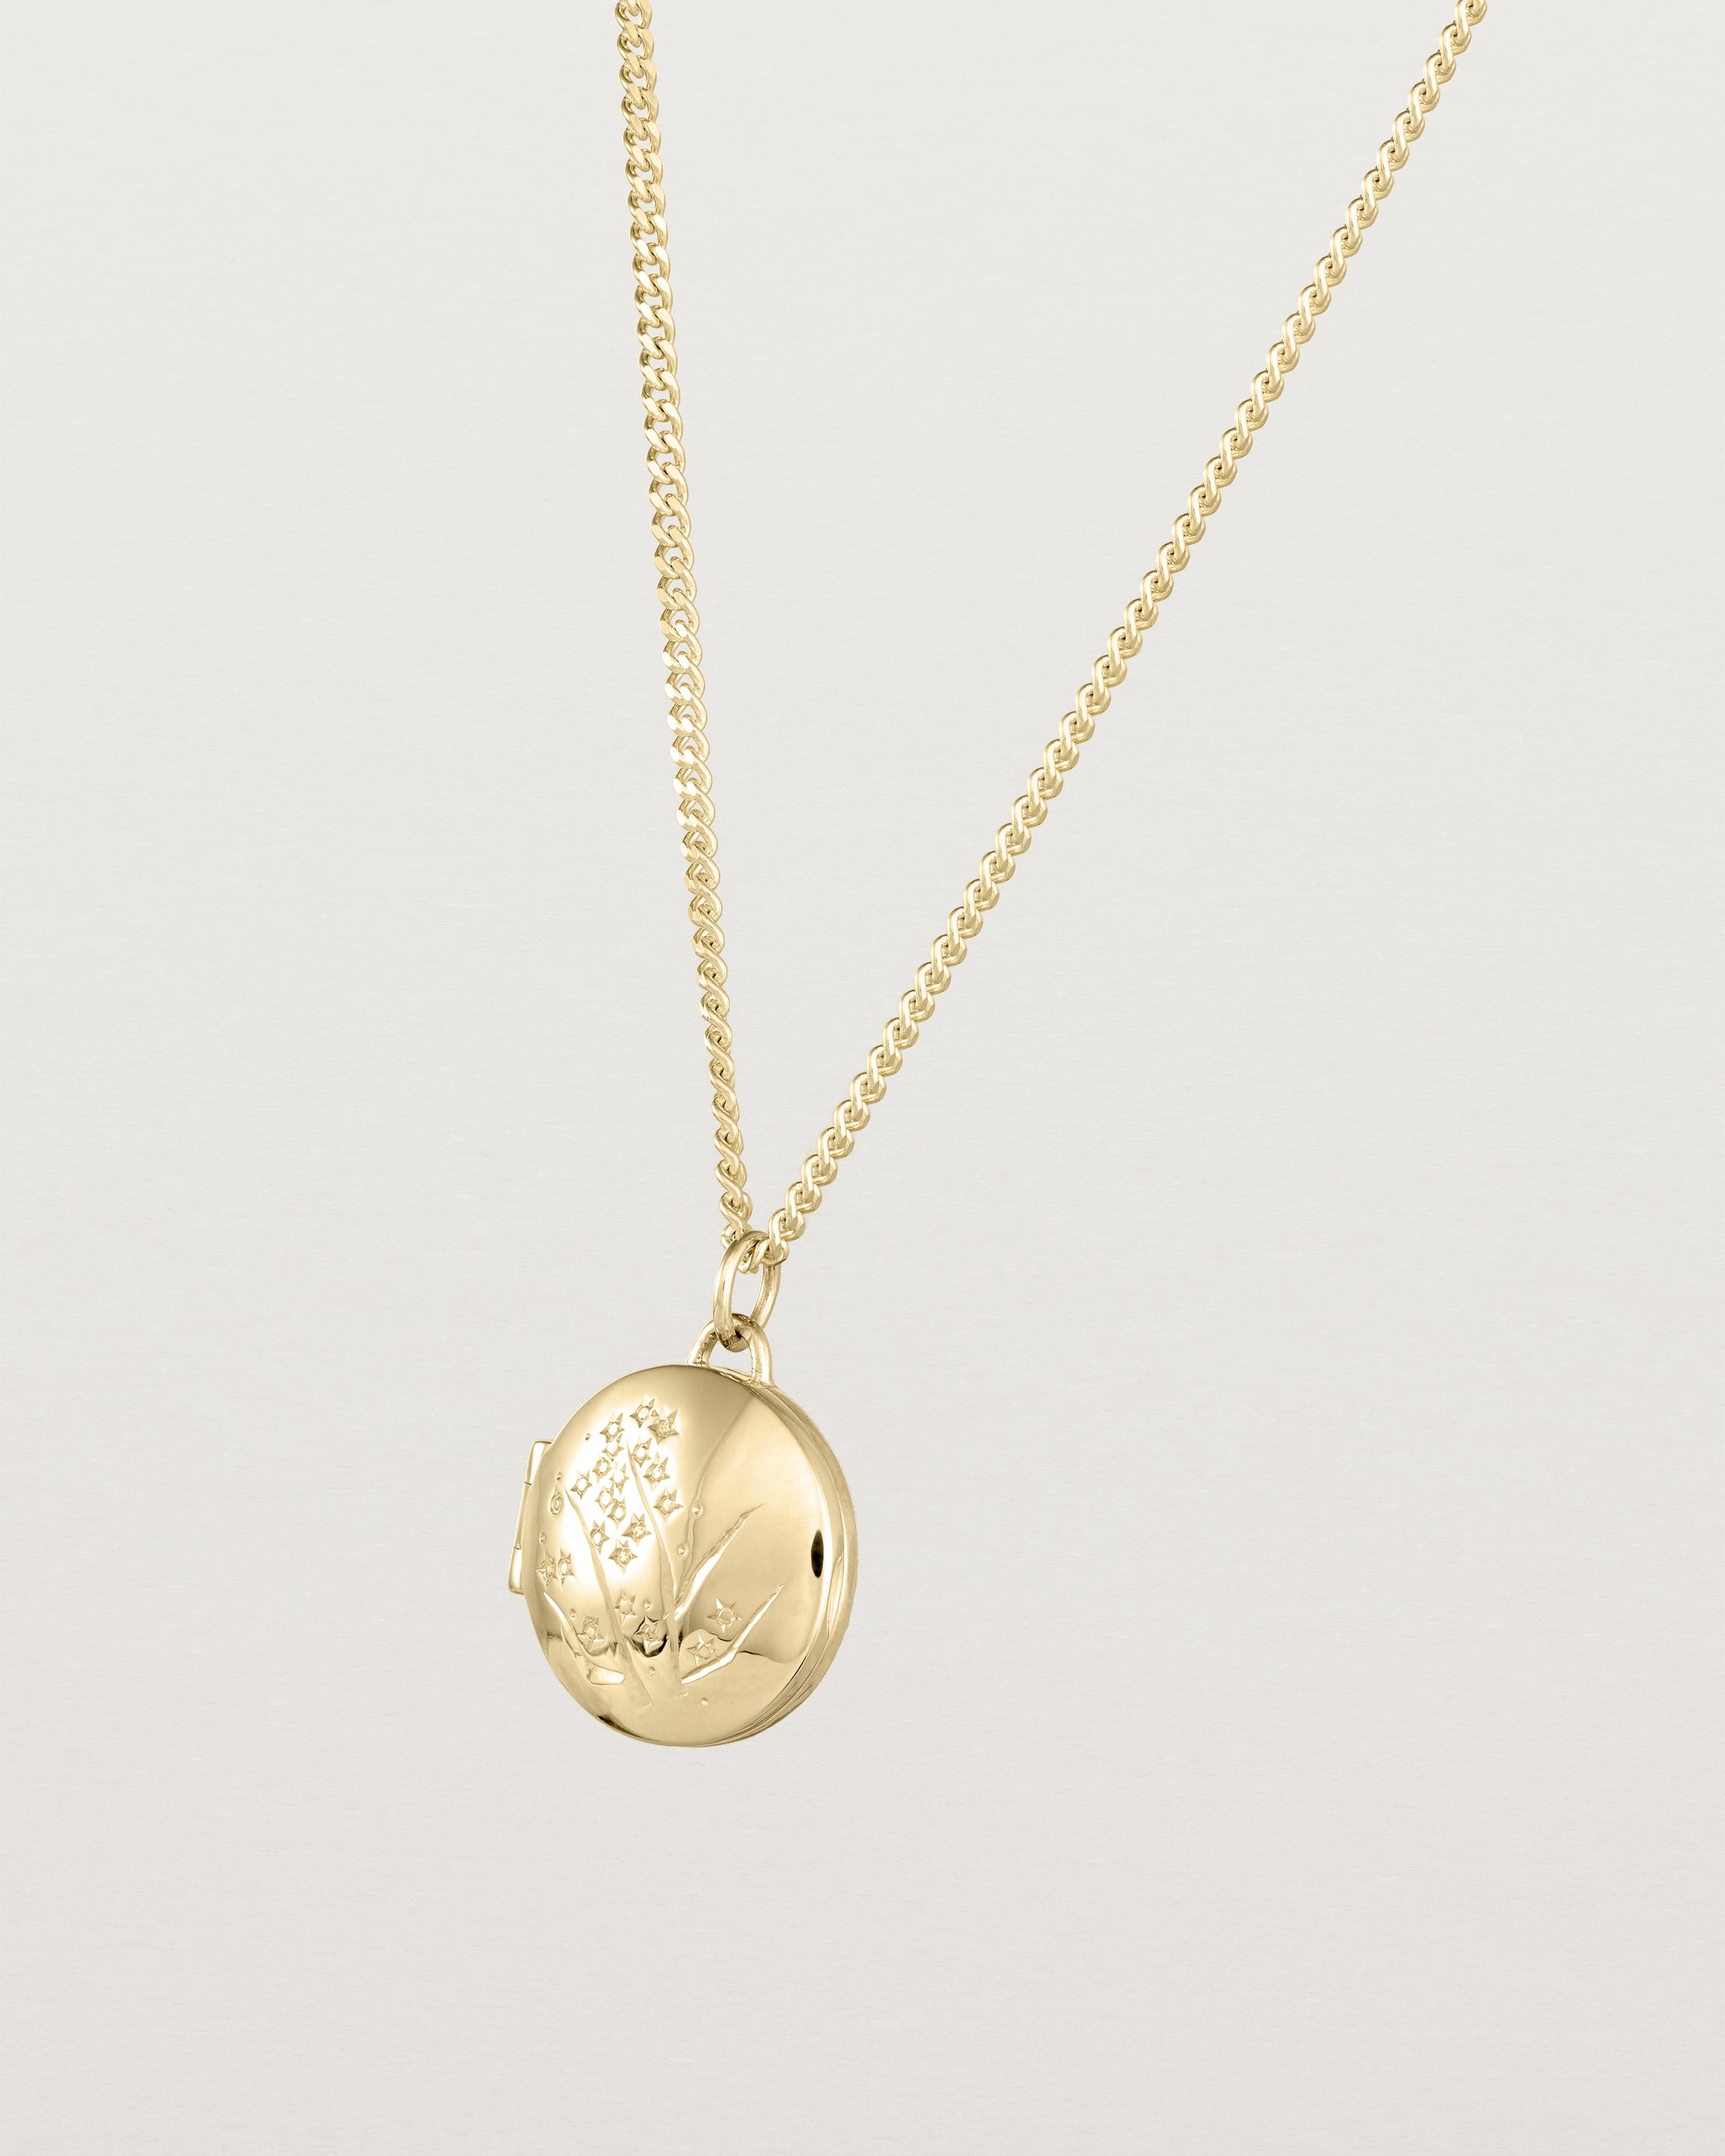 Angled view of the Golden Wattle Locket in yellow gold.